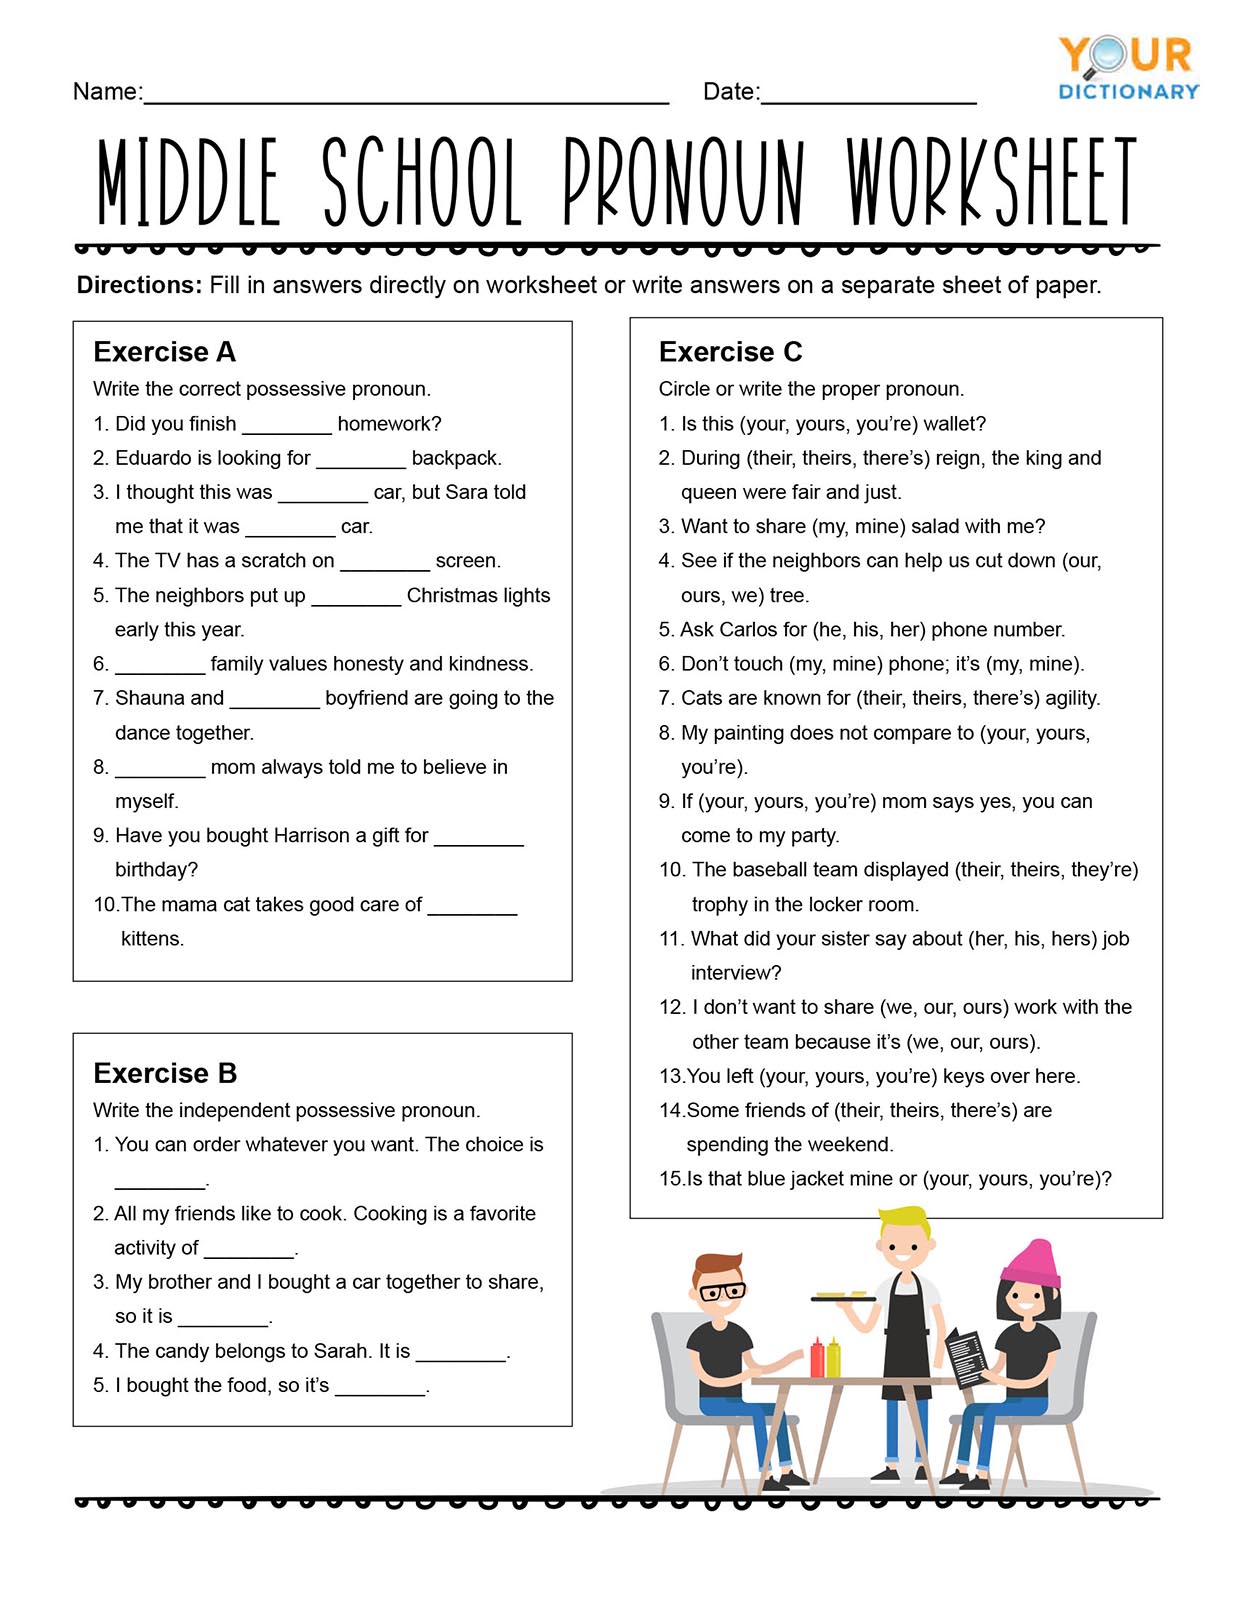 types of pronouns worksheets